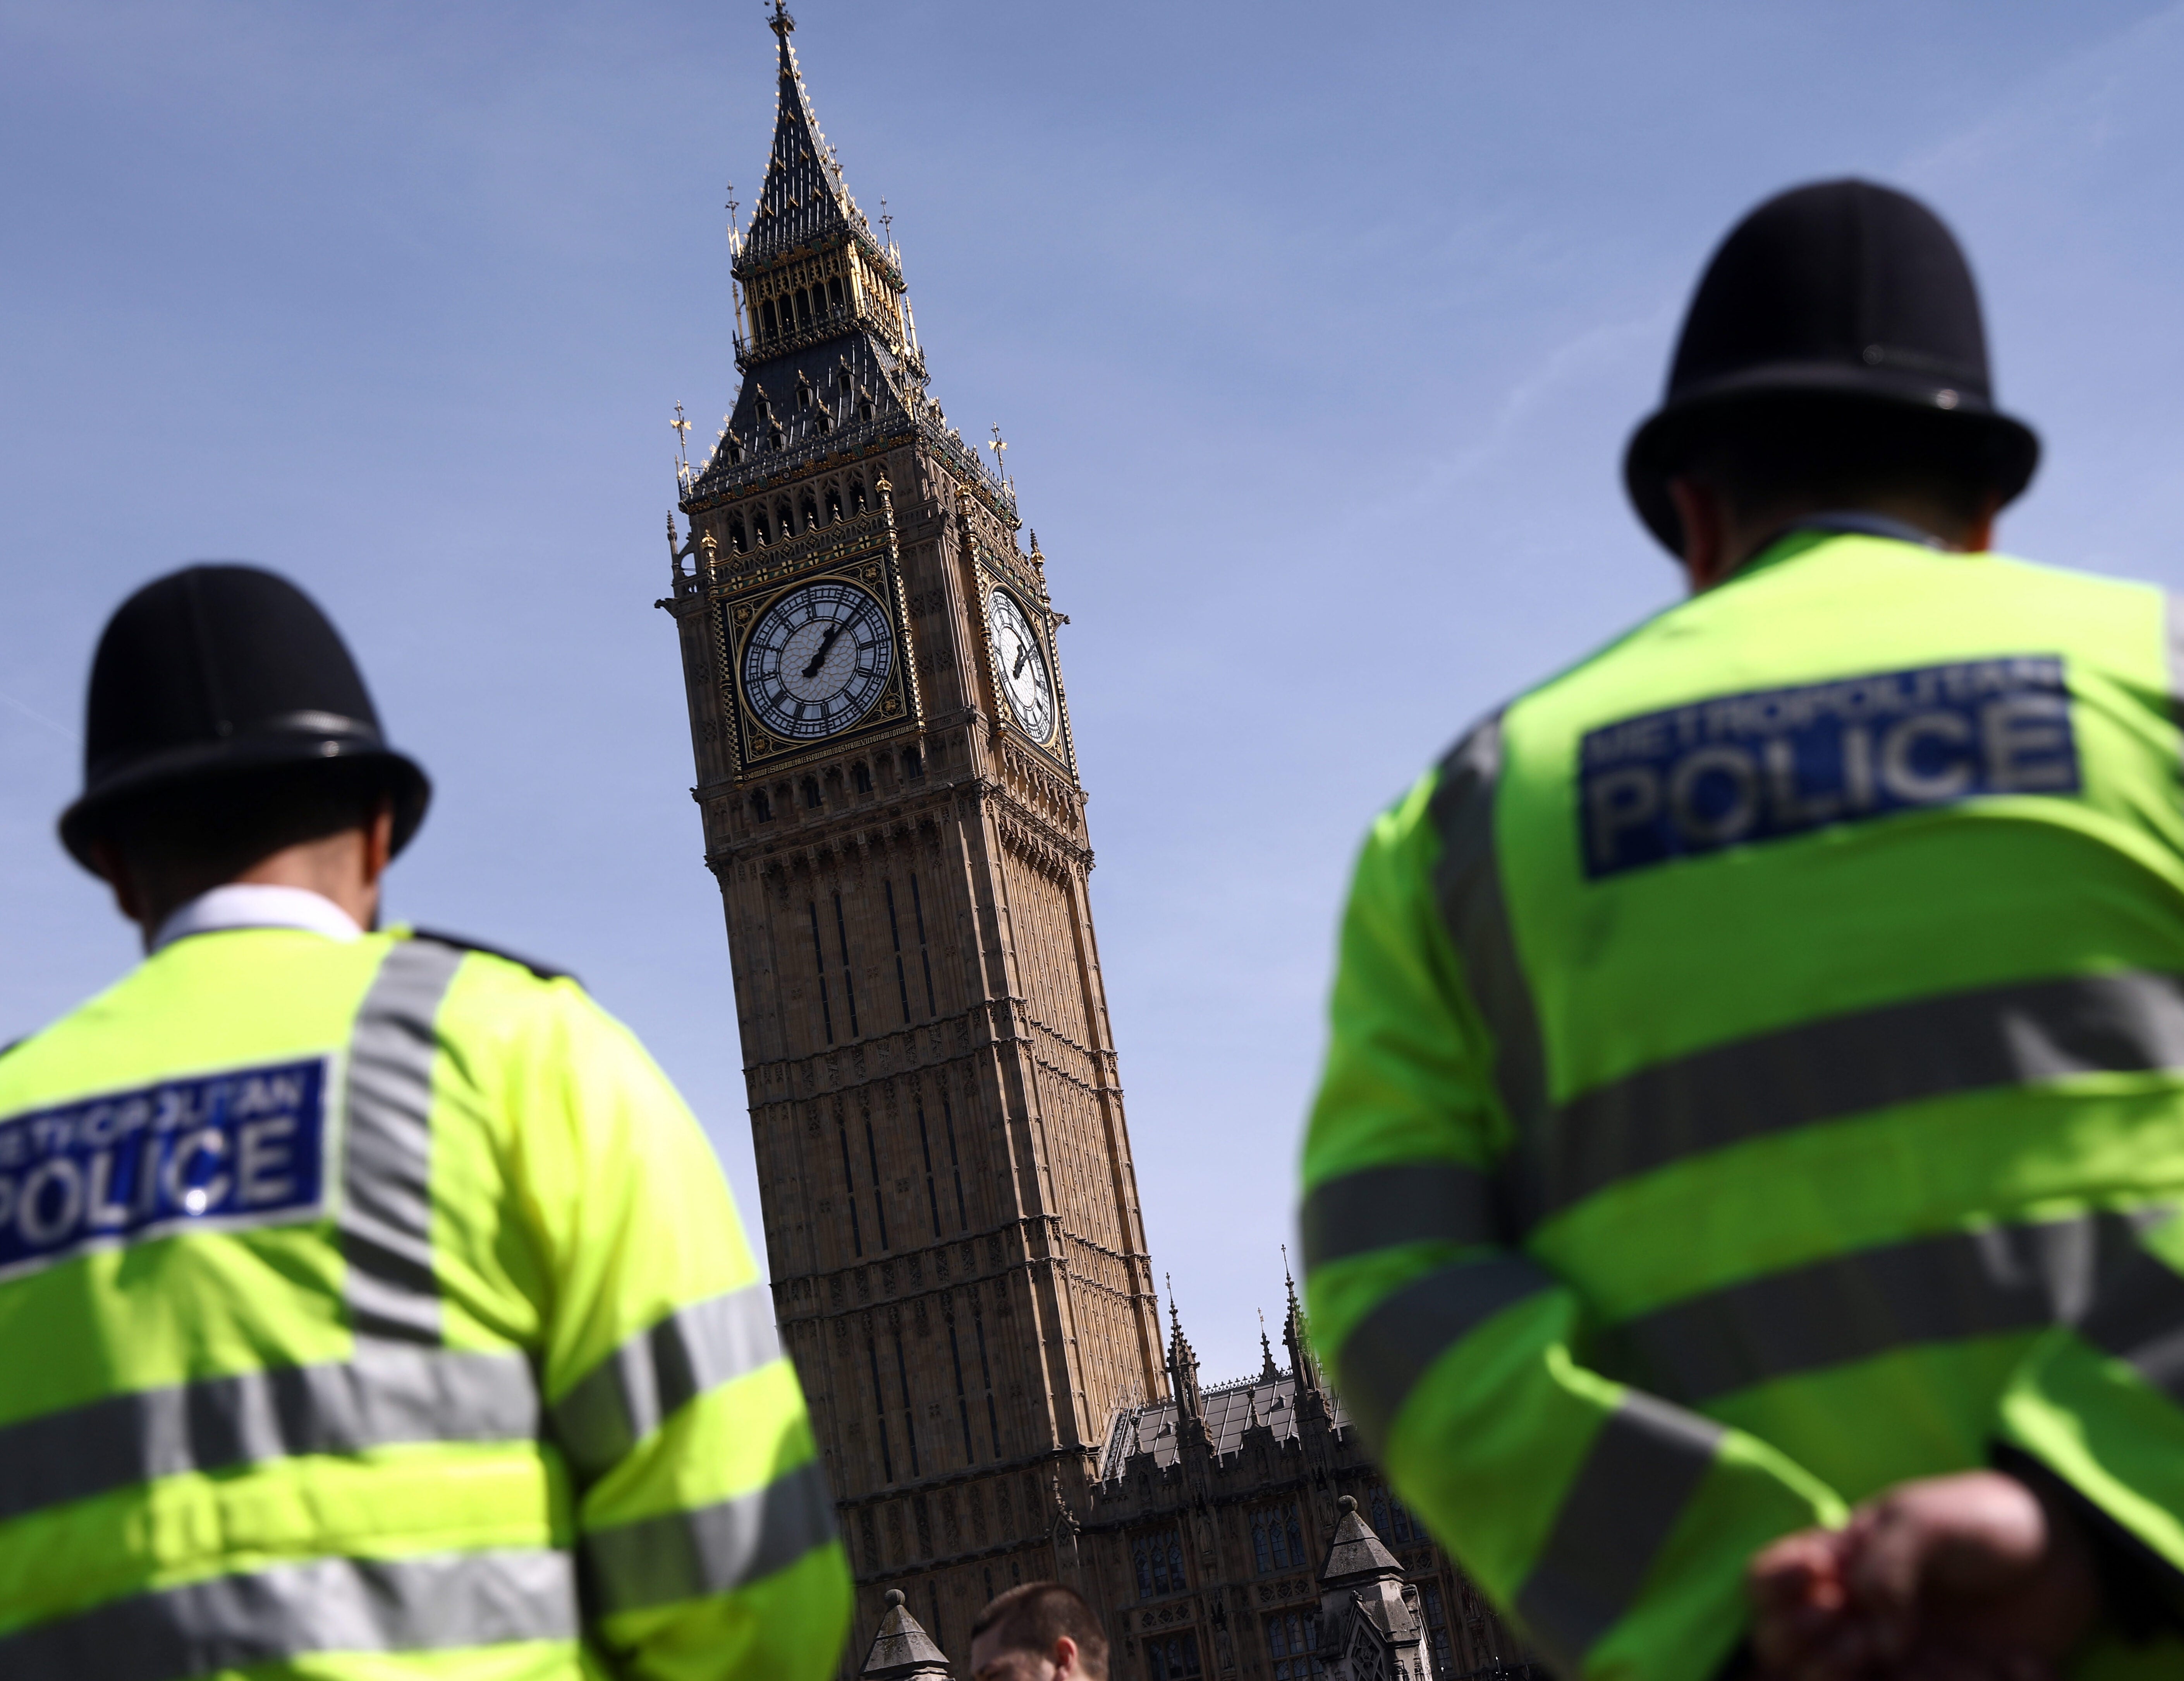 Law Commission review of police powers to seize journalistic material 'extremely worrying'